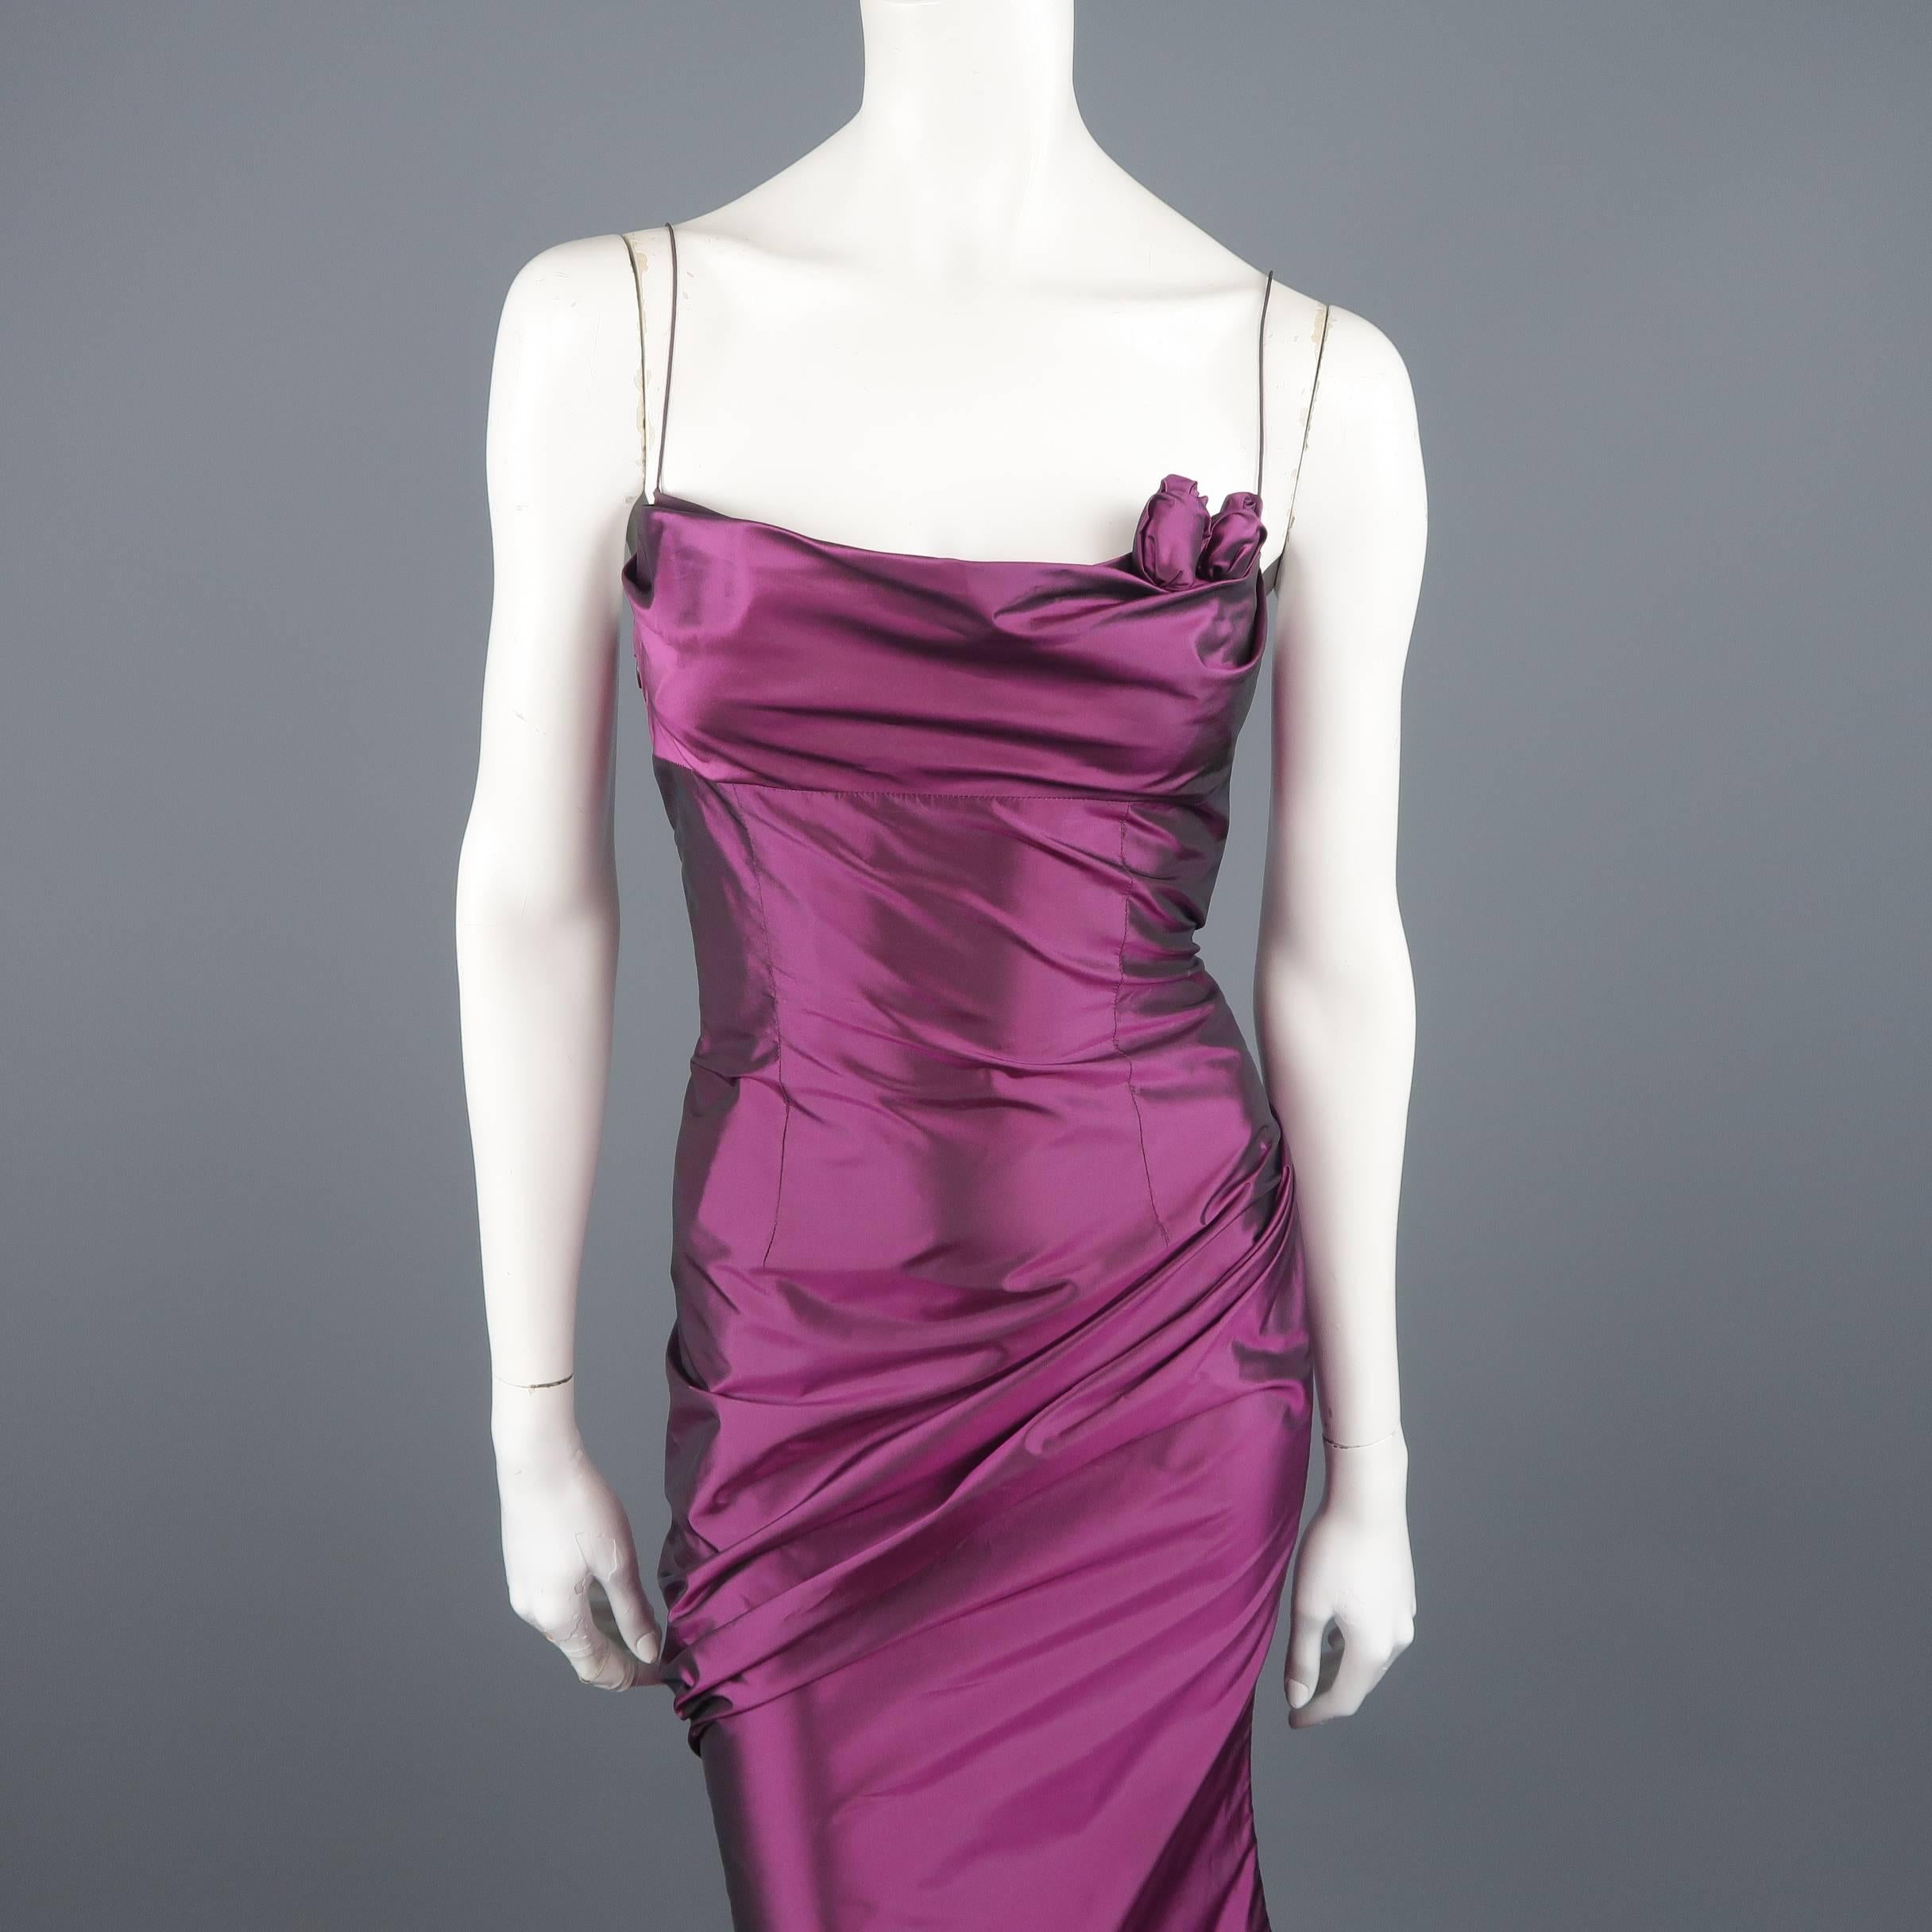 Vintage RICHARD TYLER COUTURE evening gown comes in fuchsia purple iridescent silk taffeta and features a gathered bustline, fitted body with draped side, spaghetti straps, and rosette applique details. Minor wear and marks under arms. Made in the